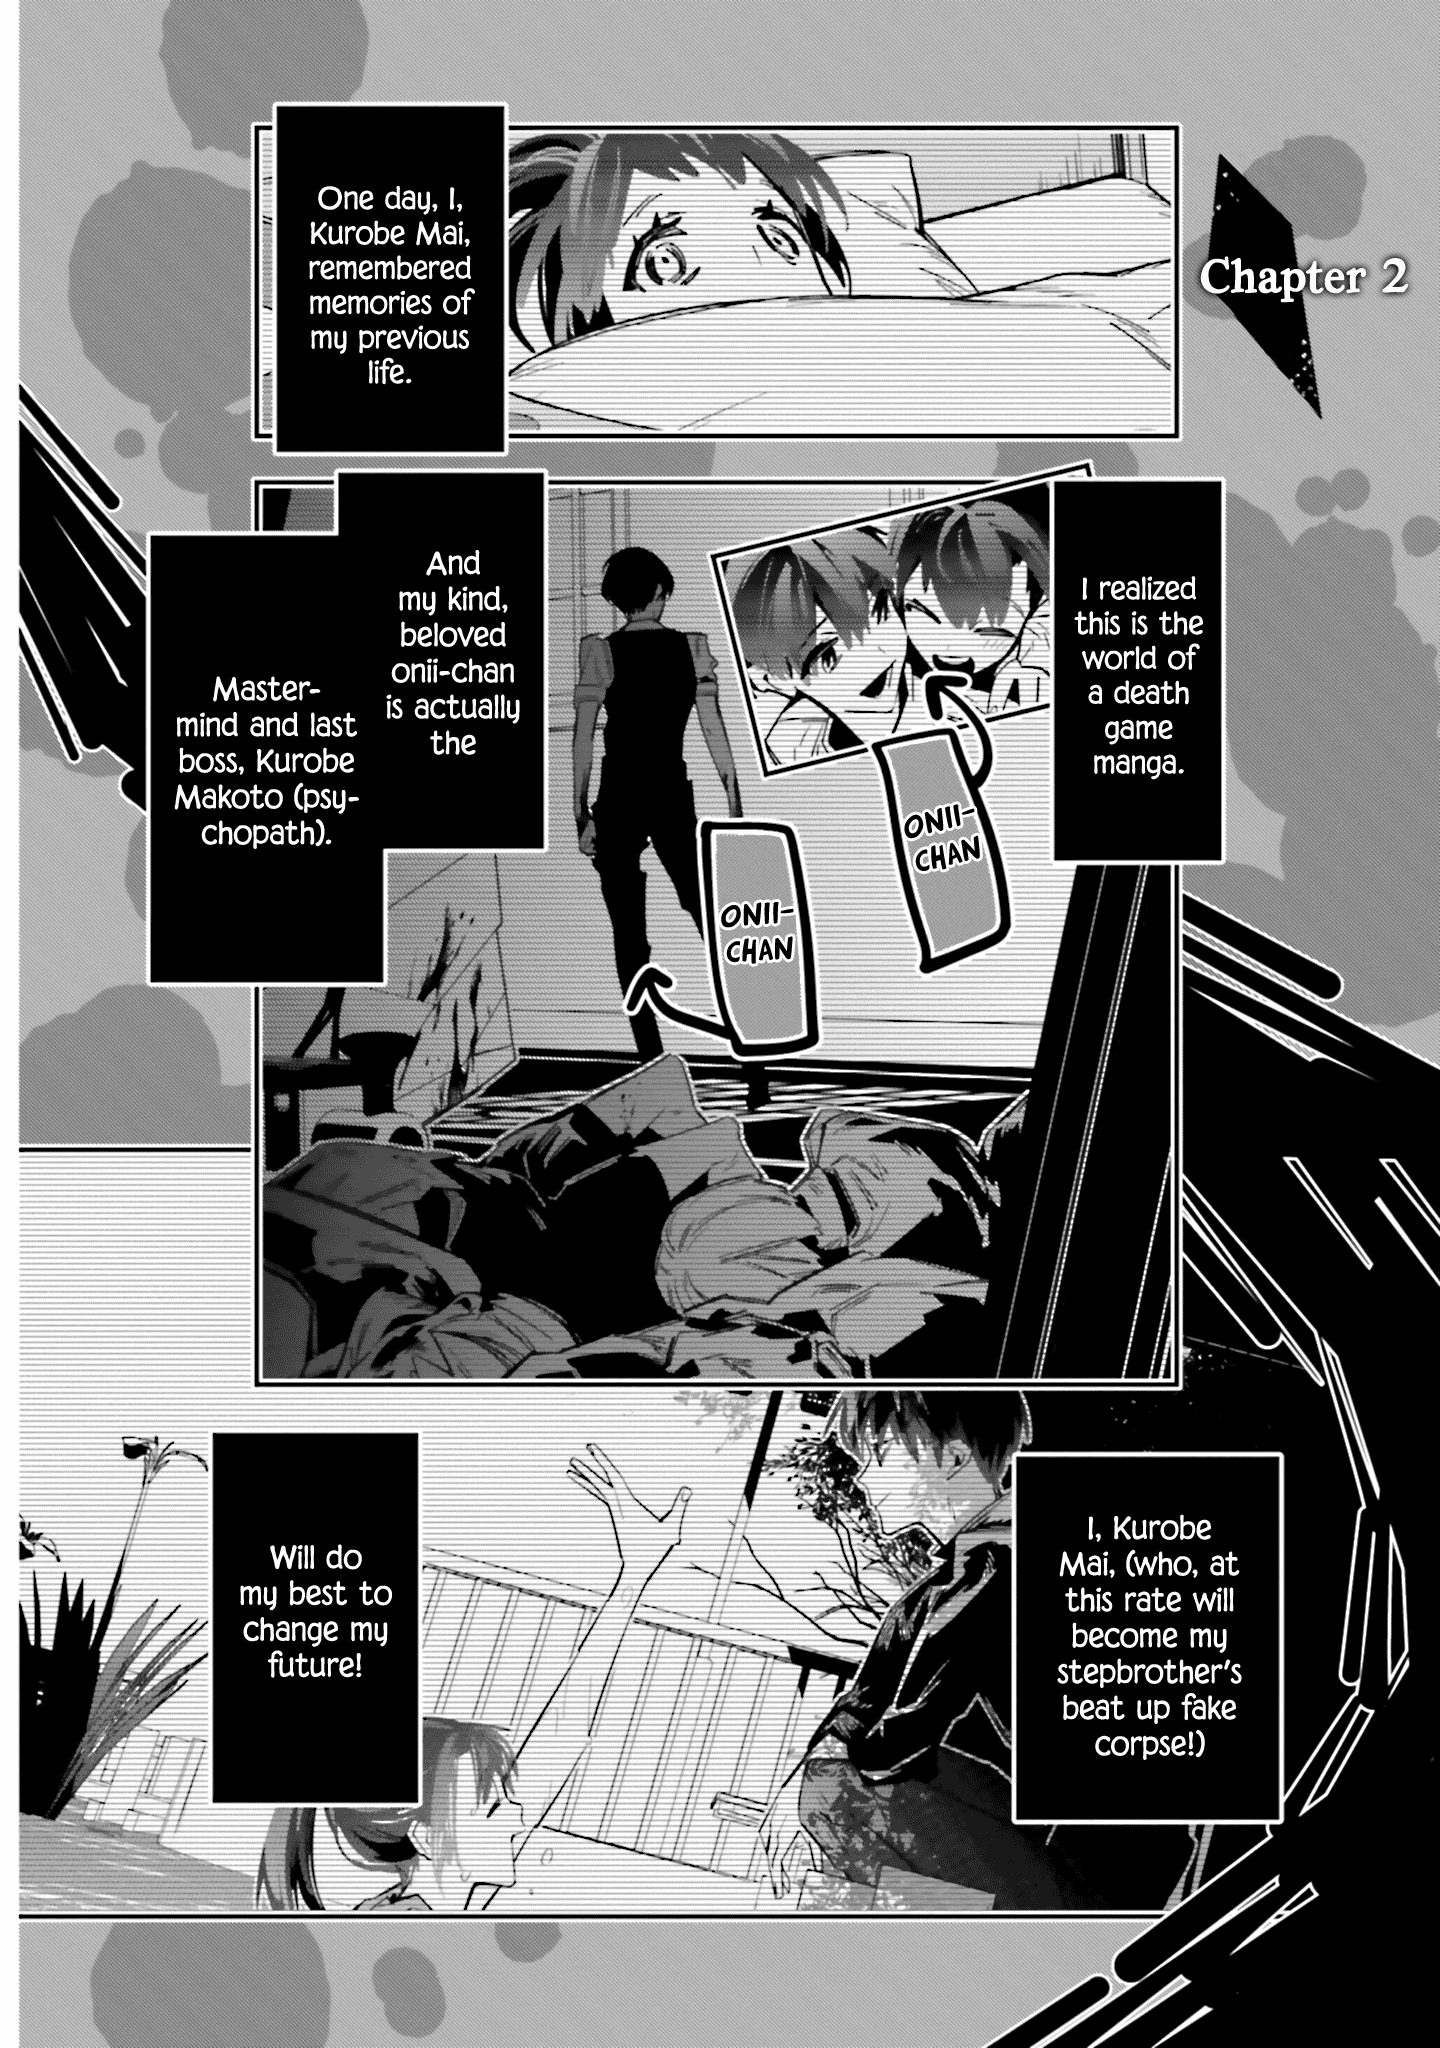 I Reincarnated As The Little Sister Of A Death Game Manga's Murder Mastermind And Failed Chapter 2 #1